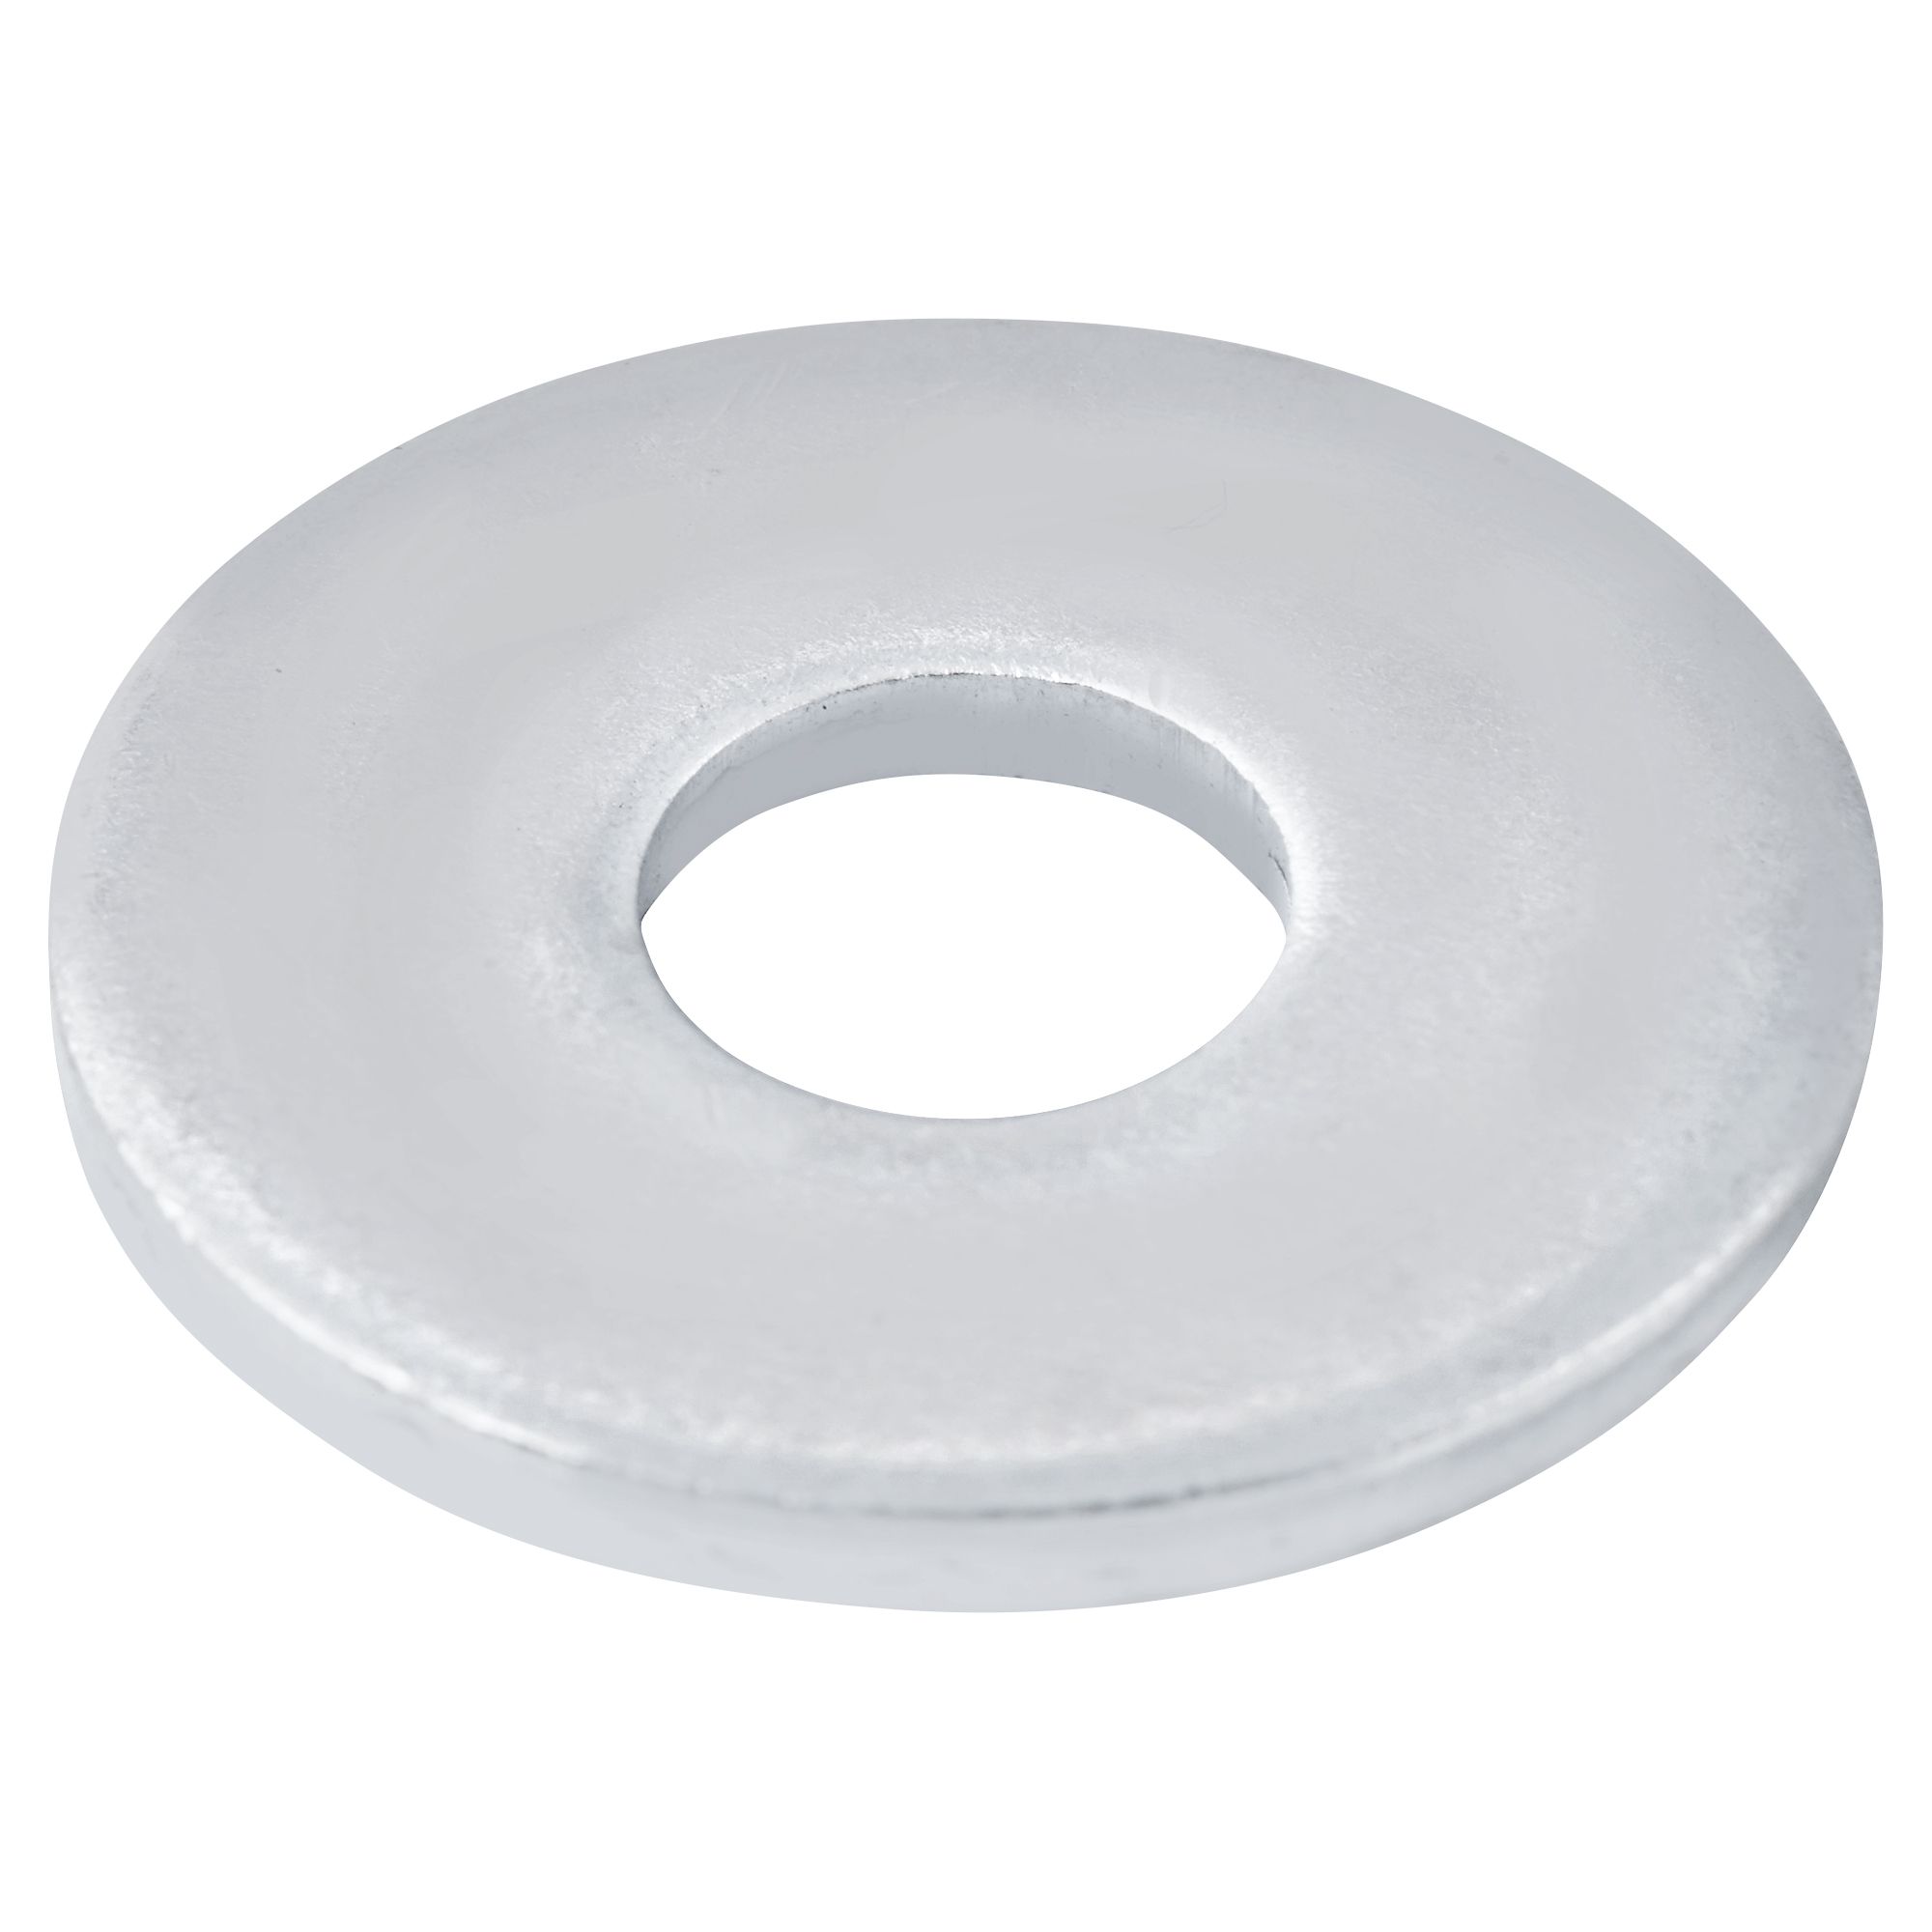 Diall M10 Carbon steel Flat Washer, Pack of 10